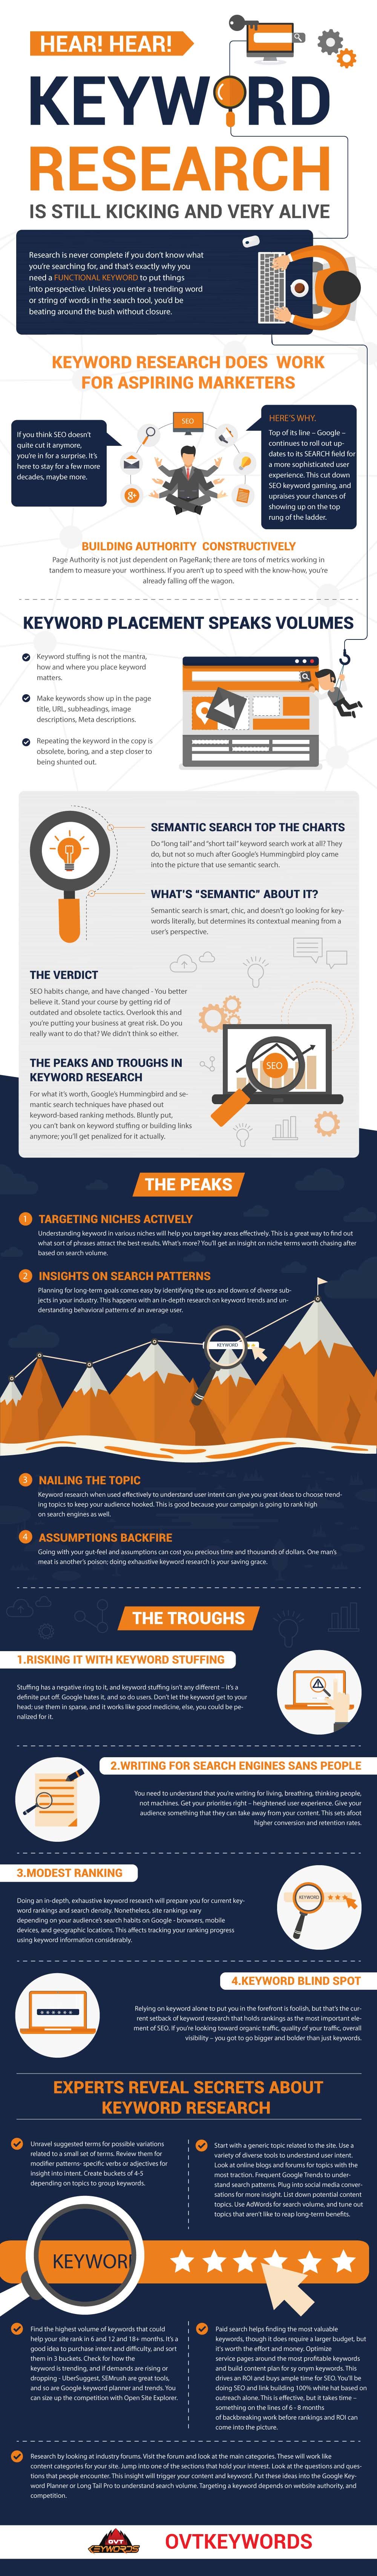 Importance of Keyword Research Infographic